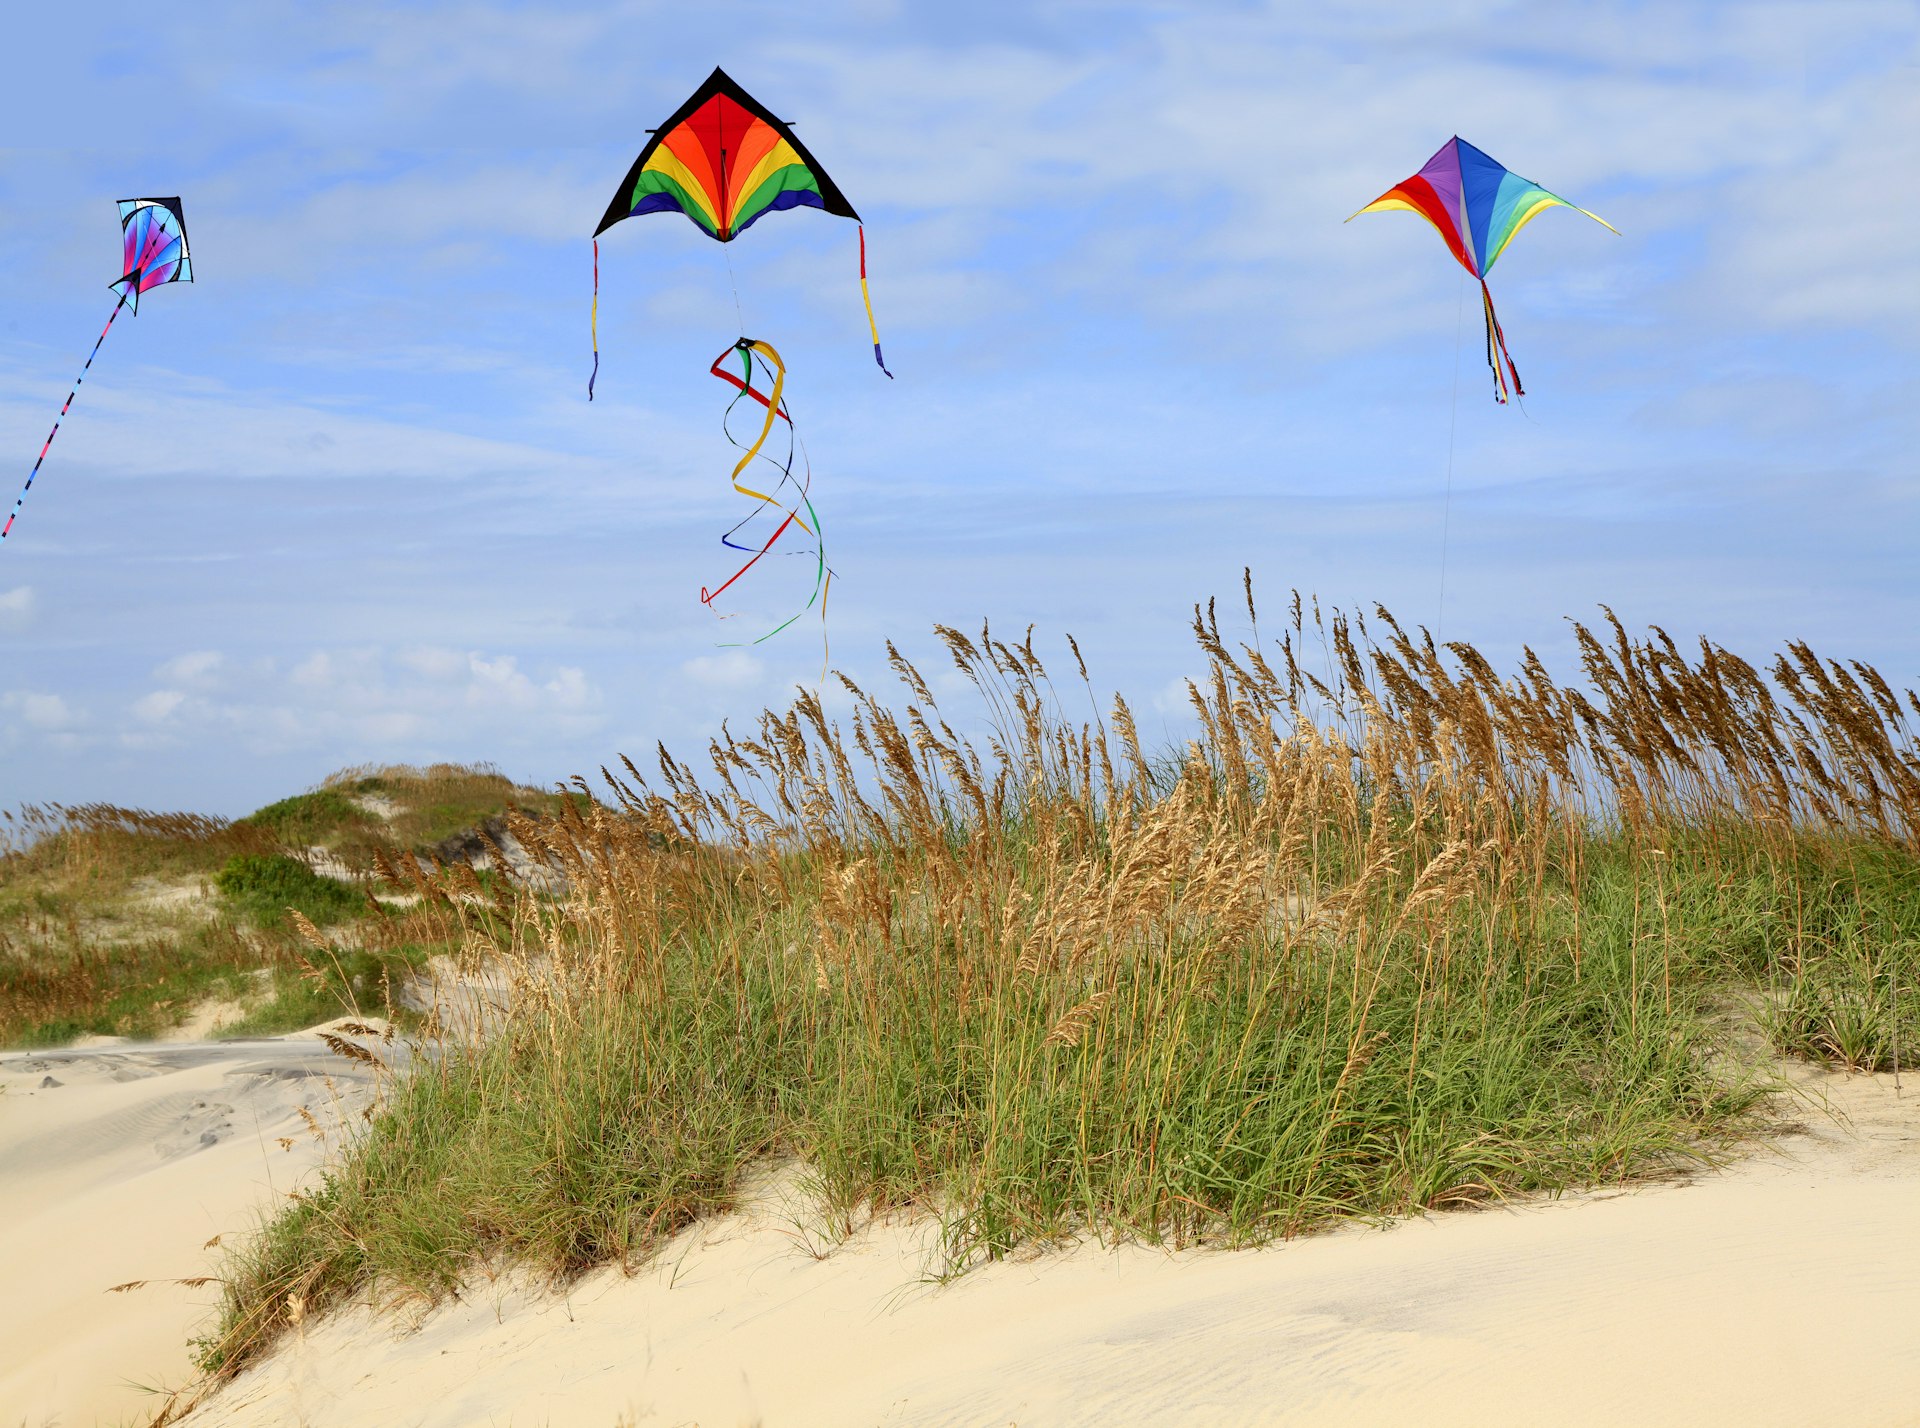 Three brightly colored kits fly above sandy dunes covered in grass 